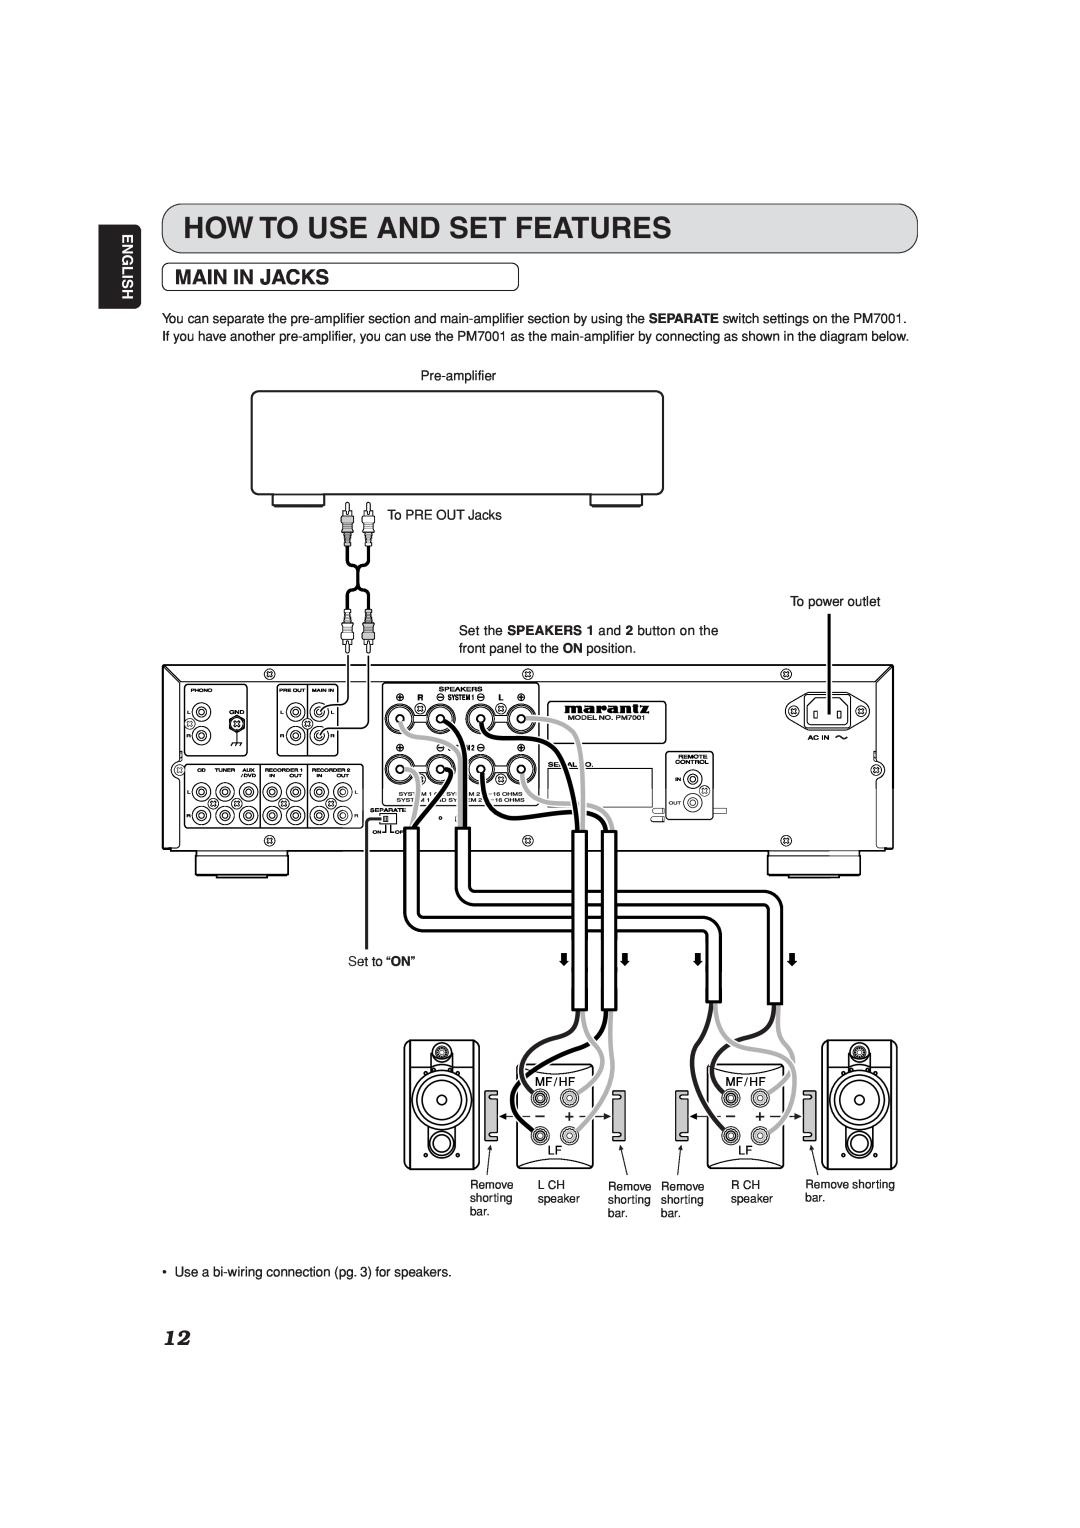 Marantz PM7001 manual How To Use And Set Features, Main In Jacks, English, Set the SPEAKERS 1 and 2 button on the 